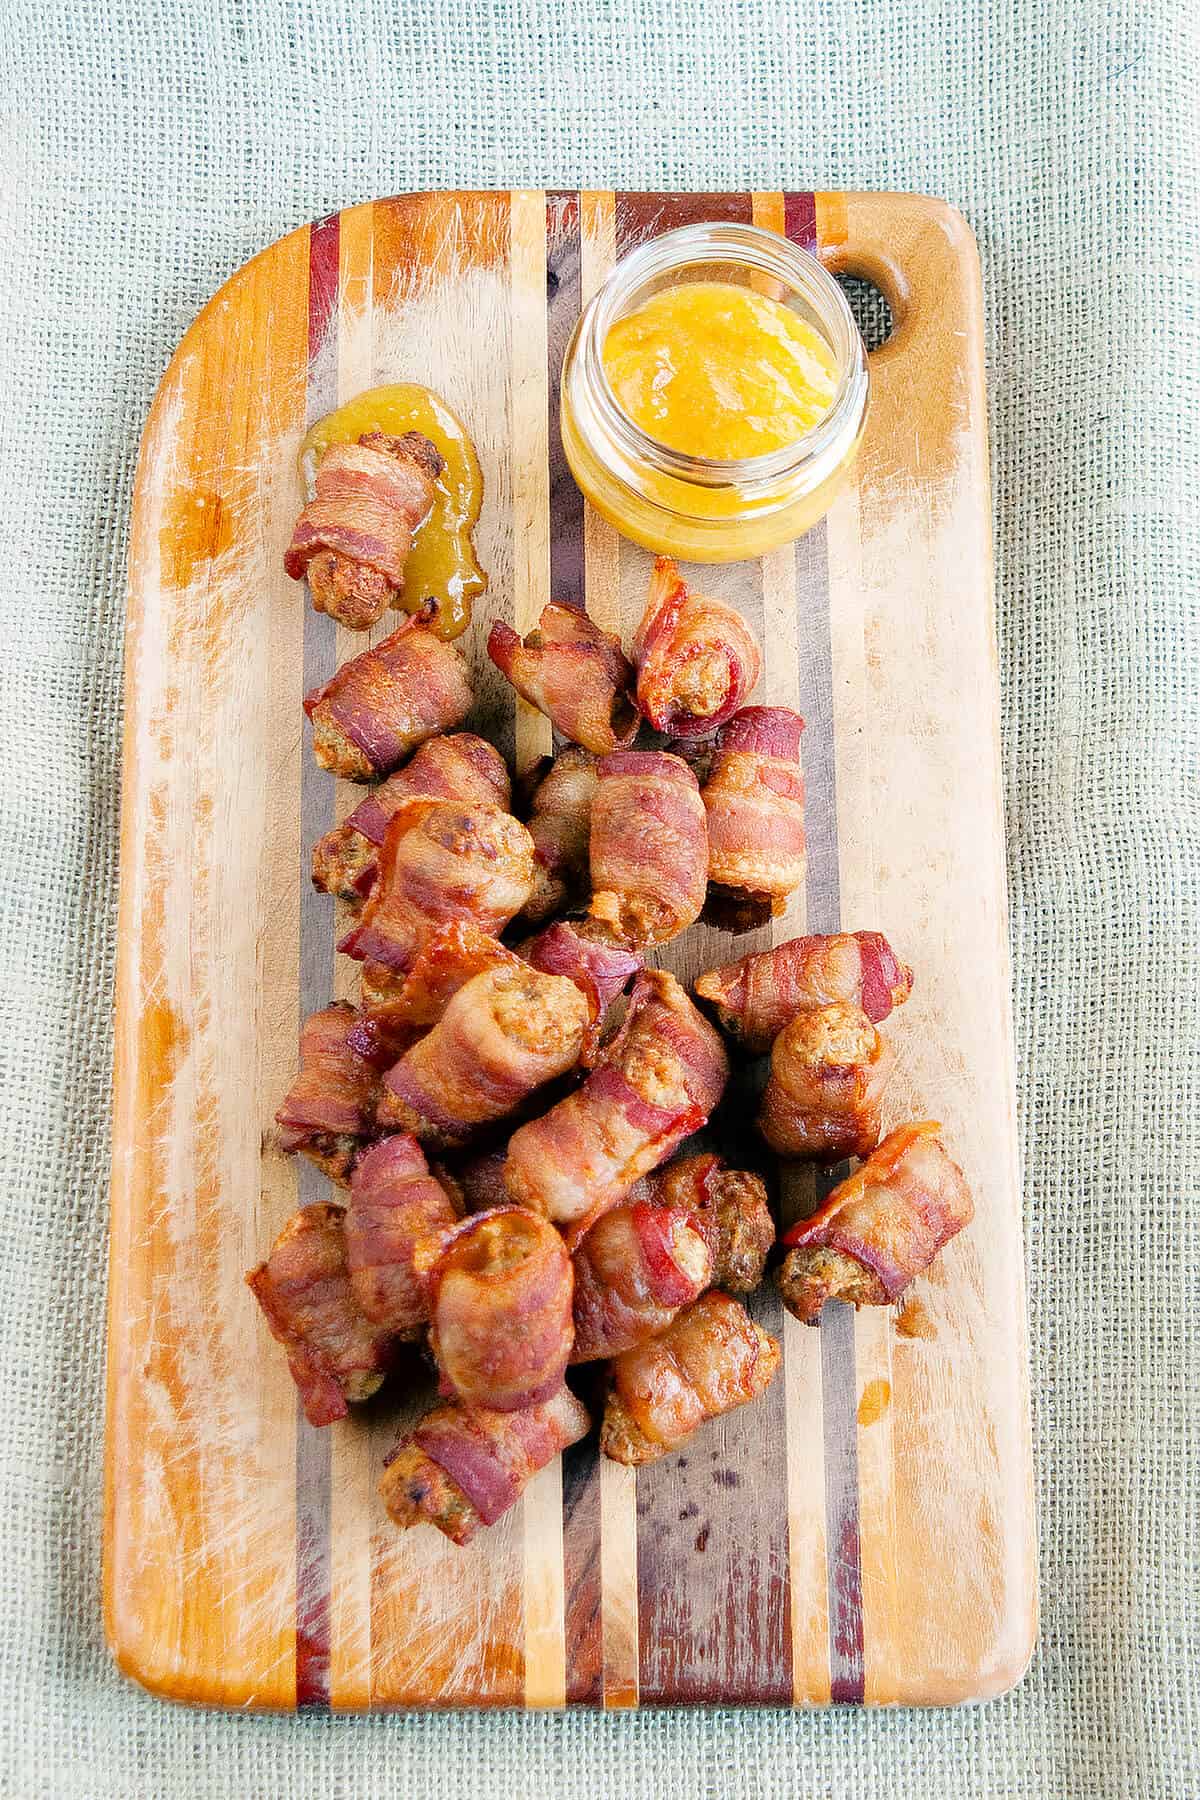 Bacon wrapped sausage balls and dipping sauce on a wooden board.